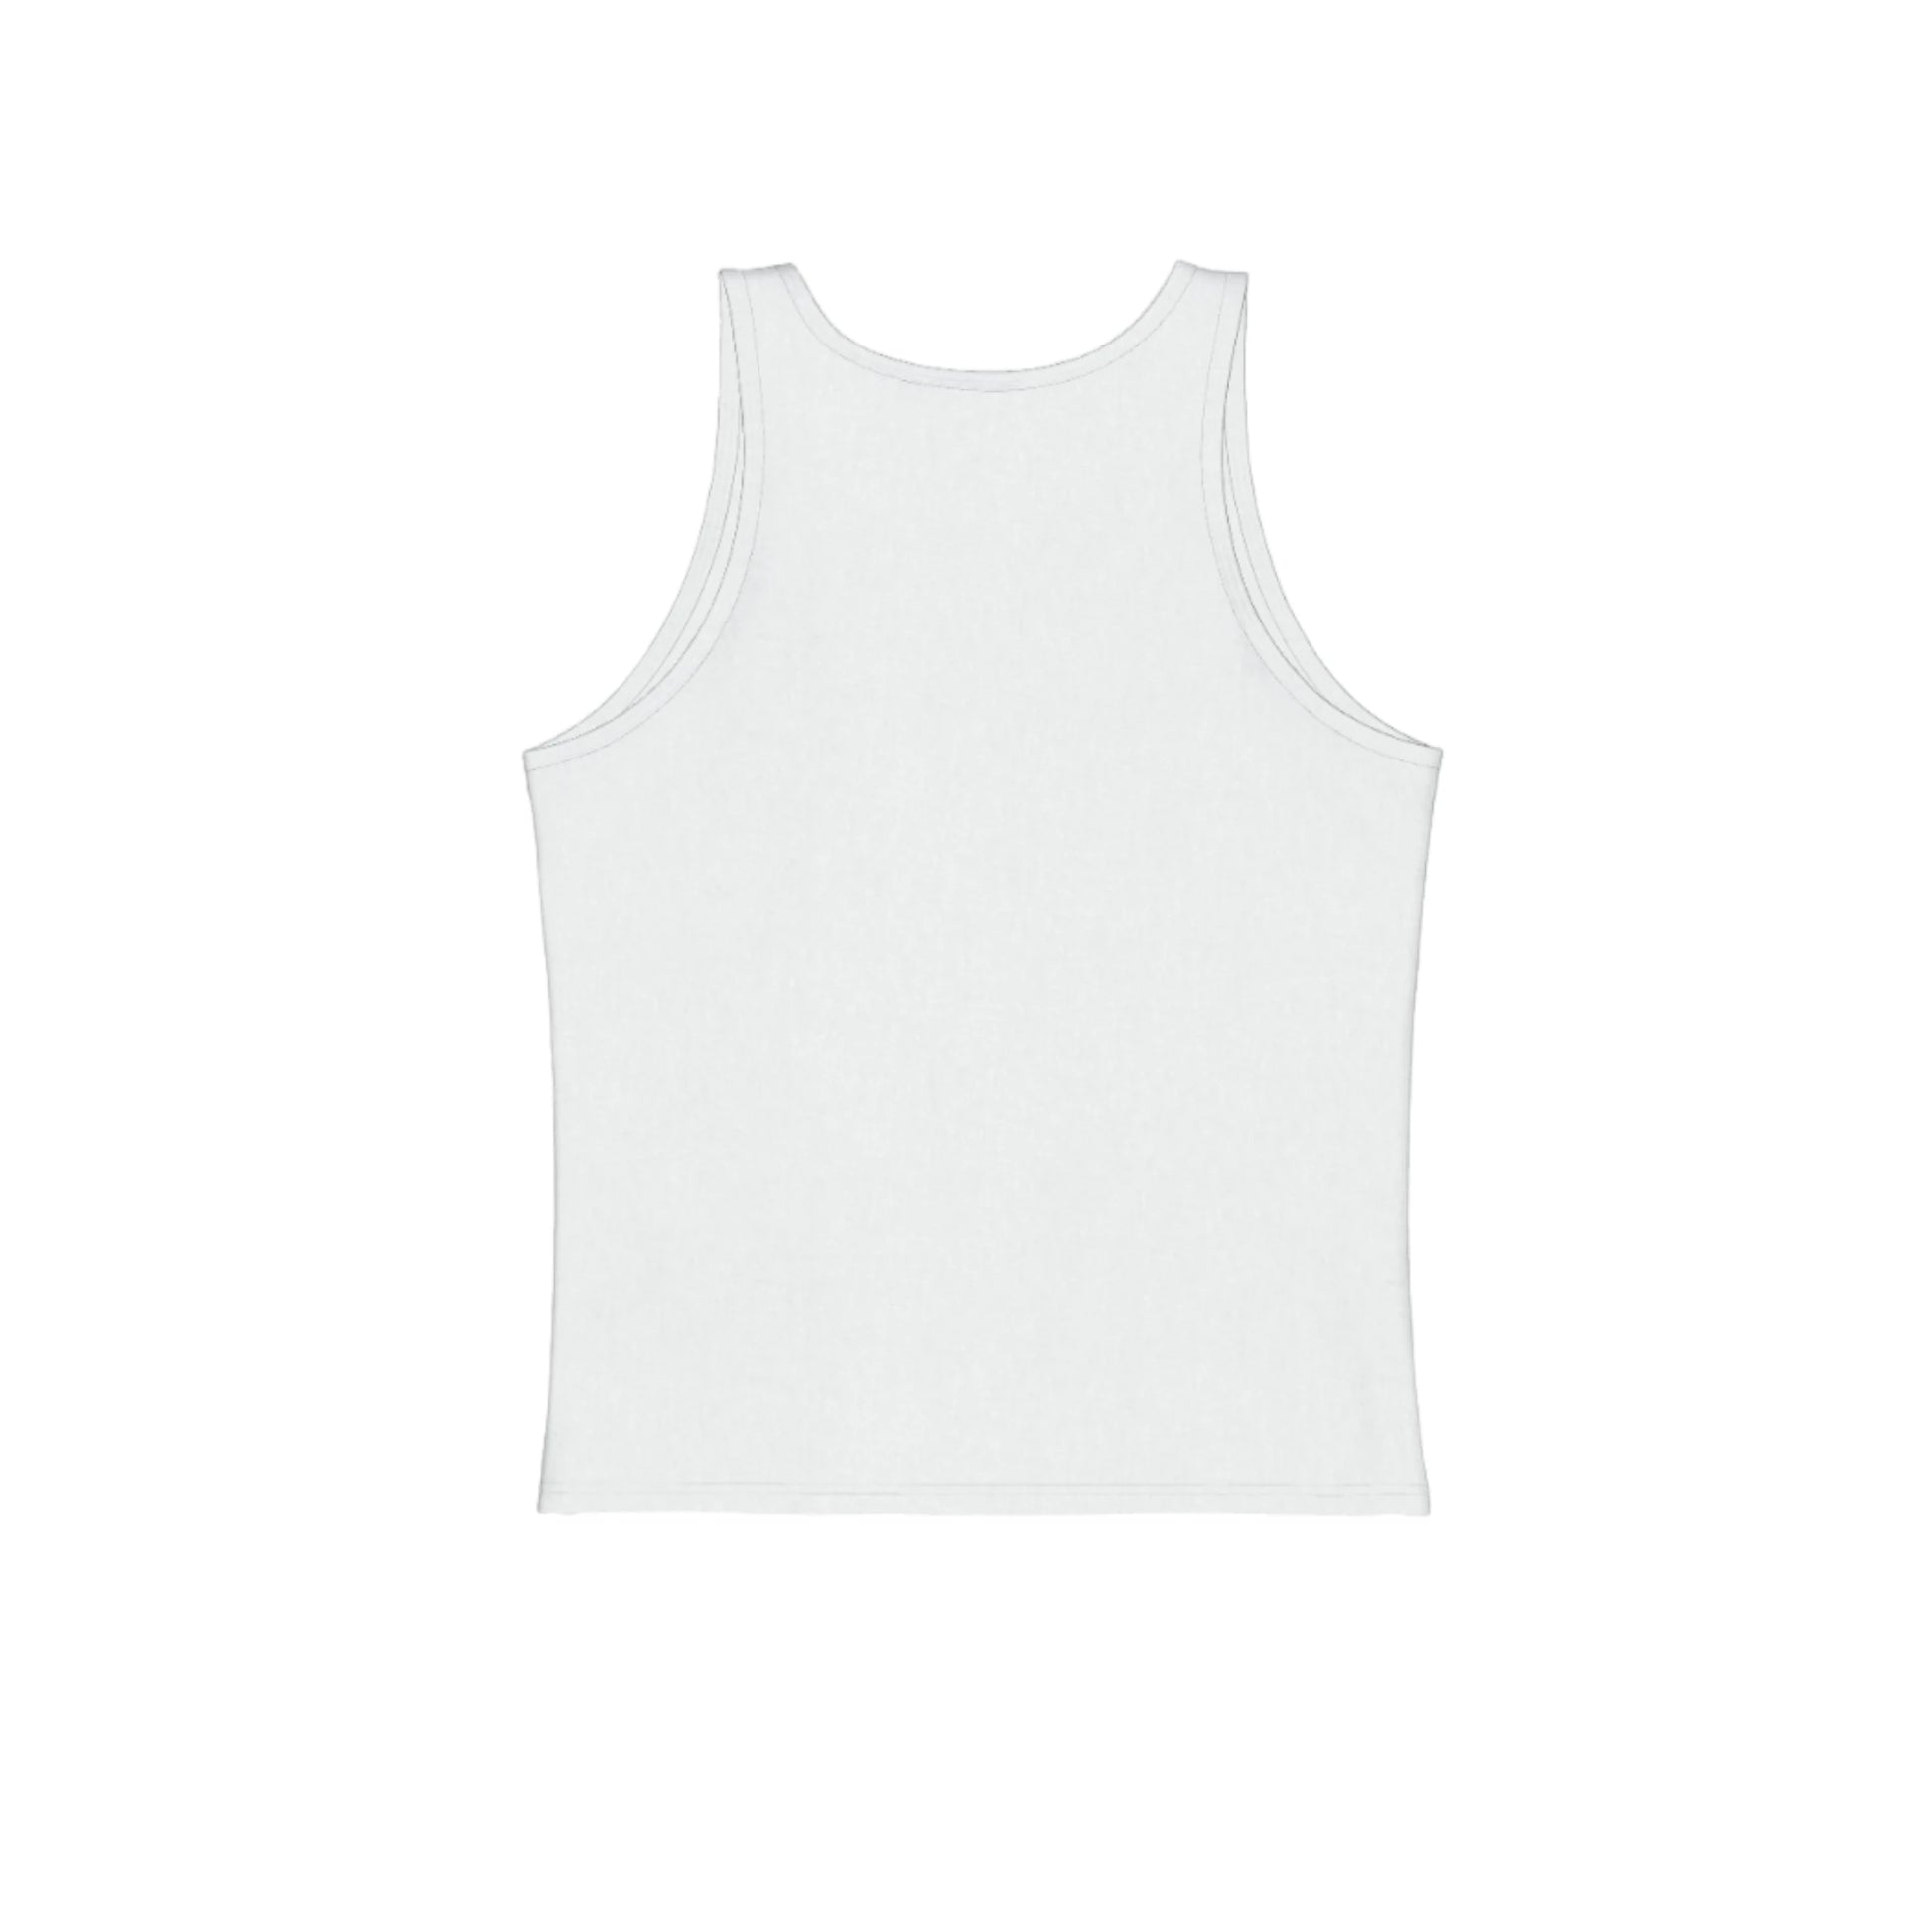 the back of the white tank top